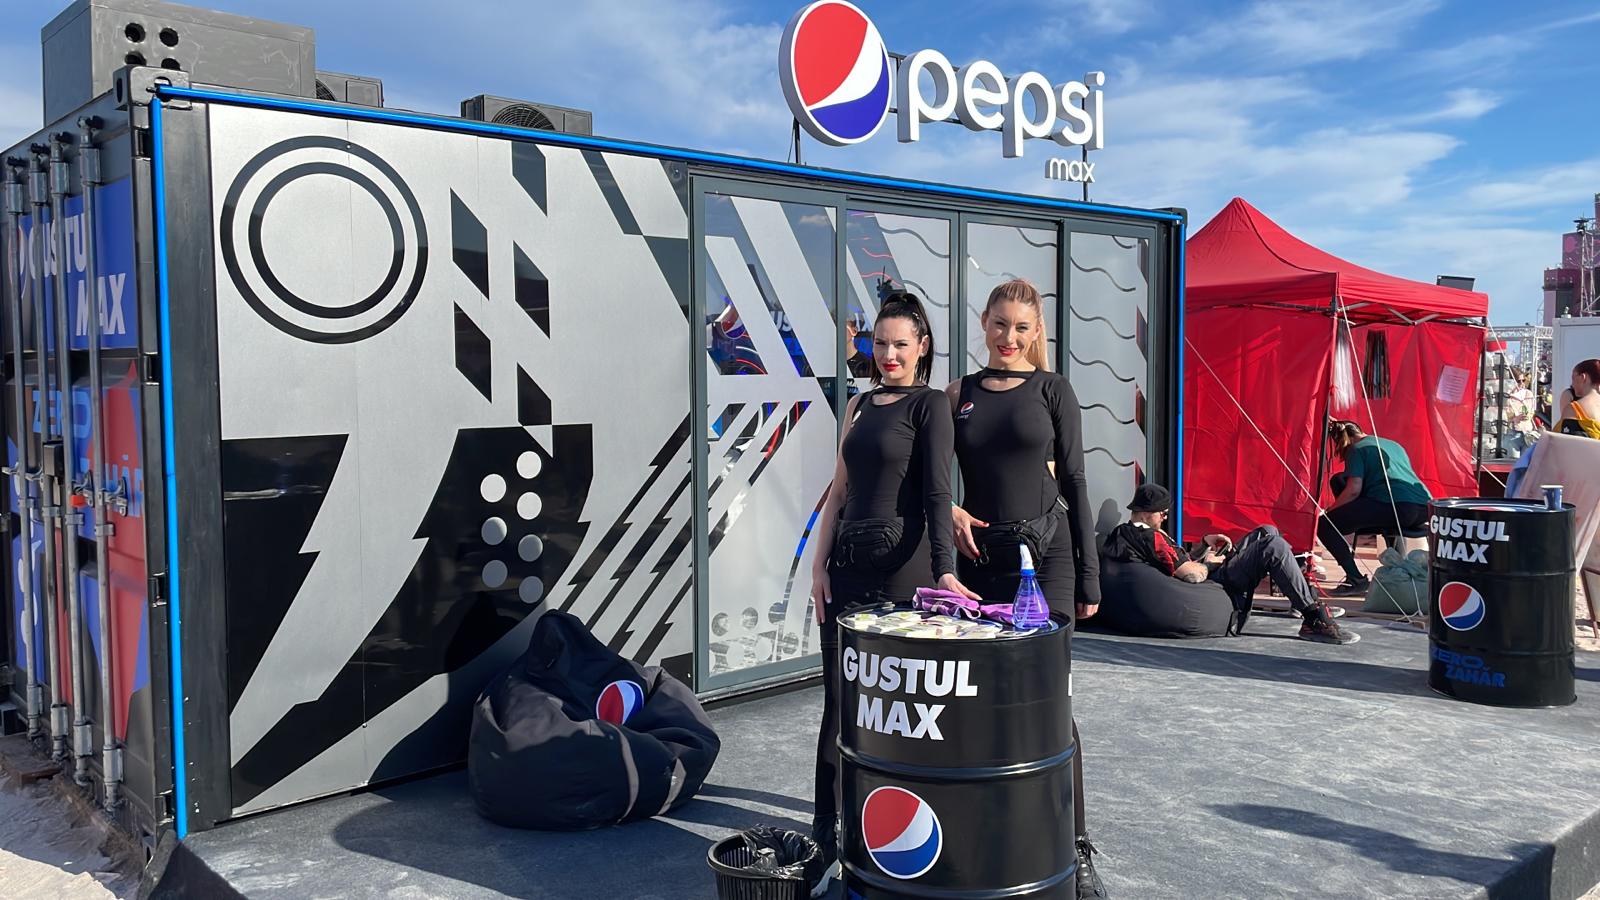 Beach, Please! Innovative Brand Engagement for Pepsi Max